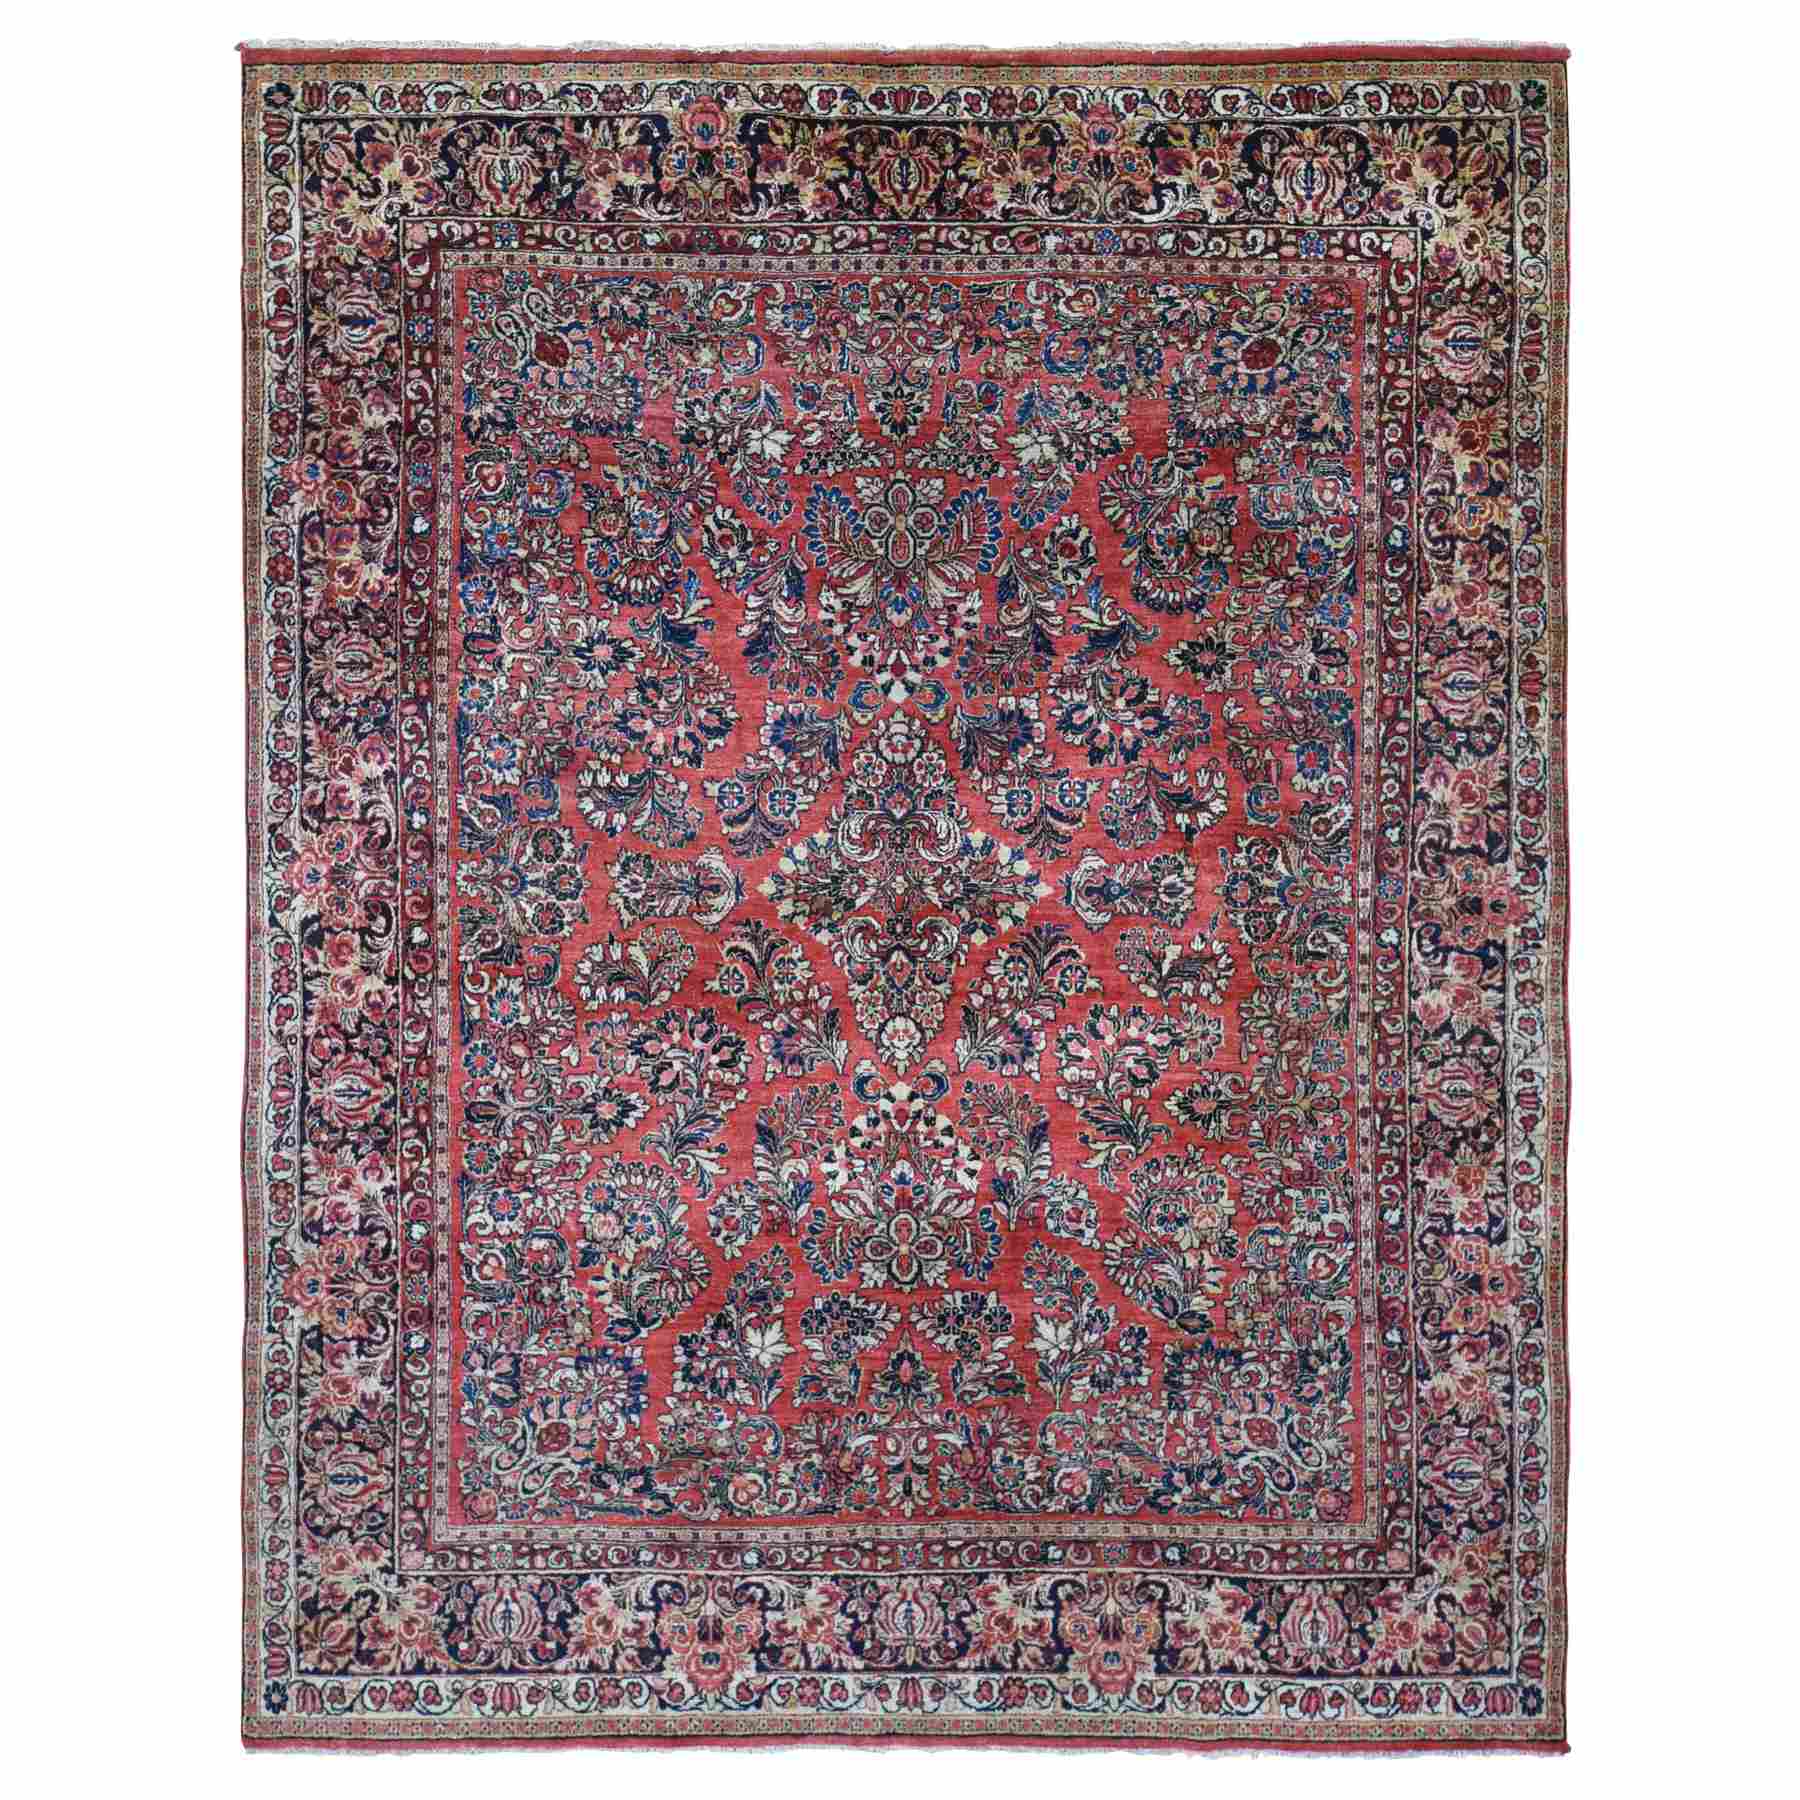 Antique-Hand-Knotted-Rug-400320